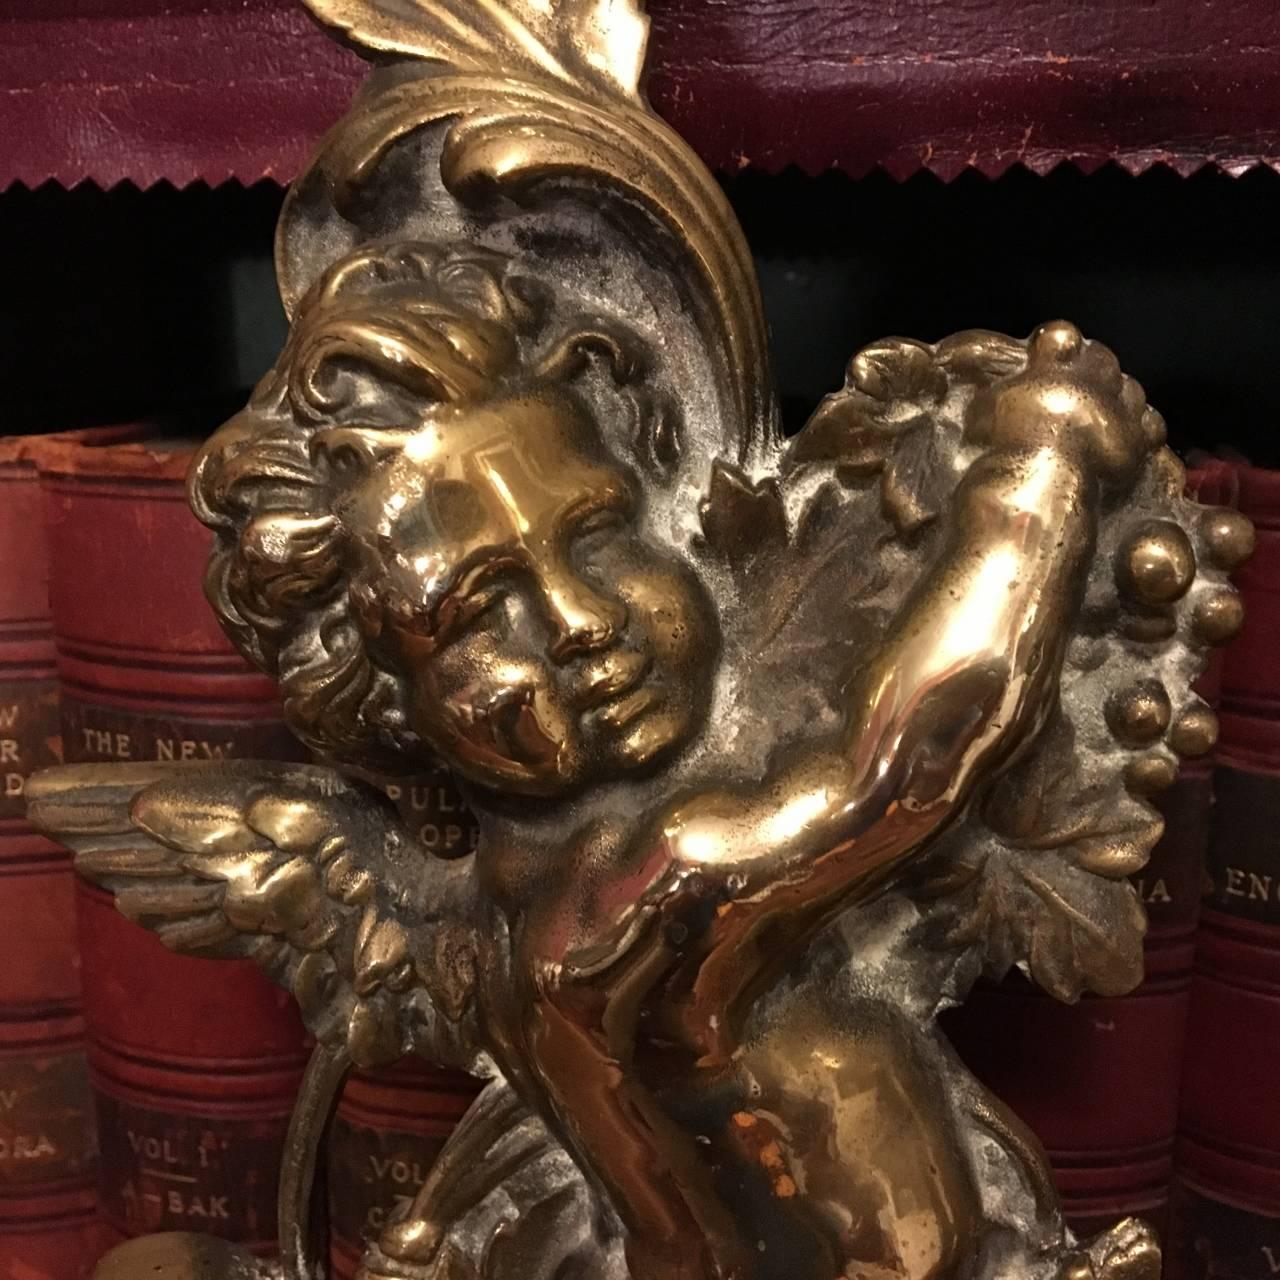 Two identical brass doorstops of cherubs in brass and dated circa 1930.
In solid brass, they are in excellent condition and are showing signs of age and patina. Great furnishing and stylish idea to have one at the front and one at the back